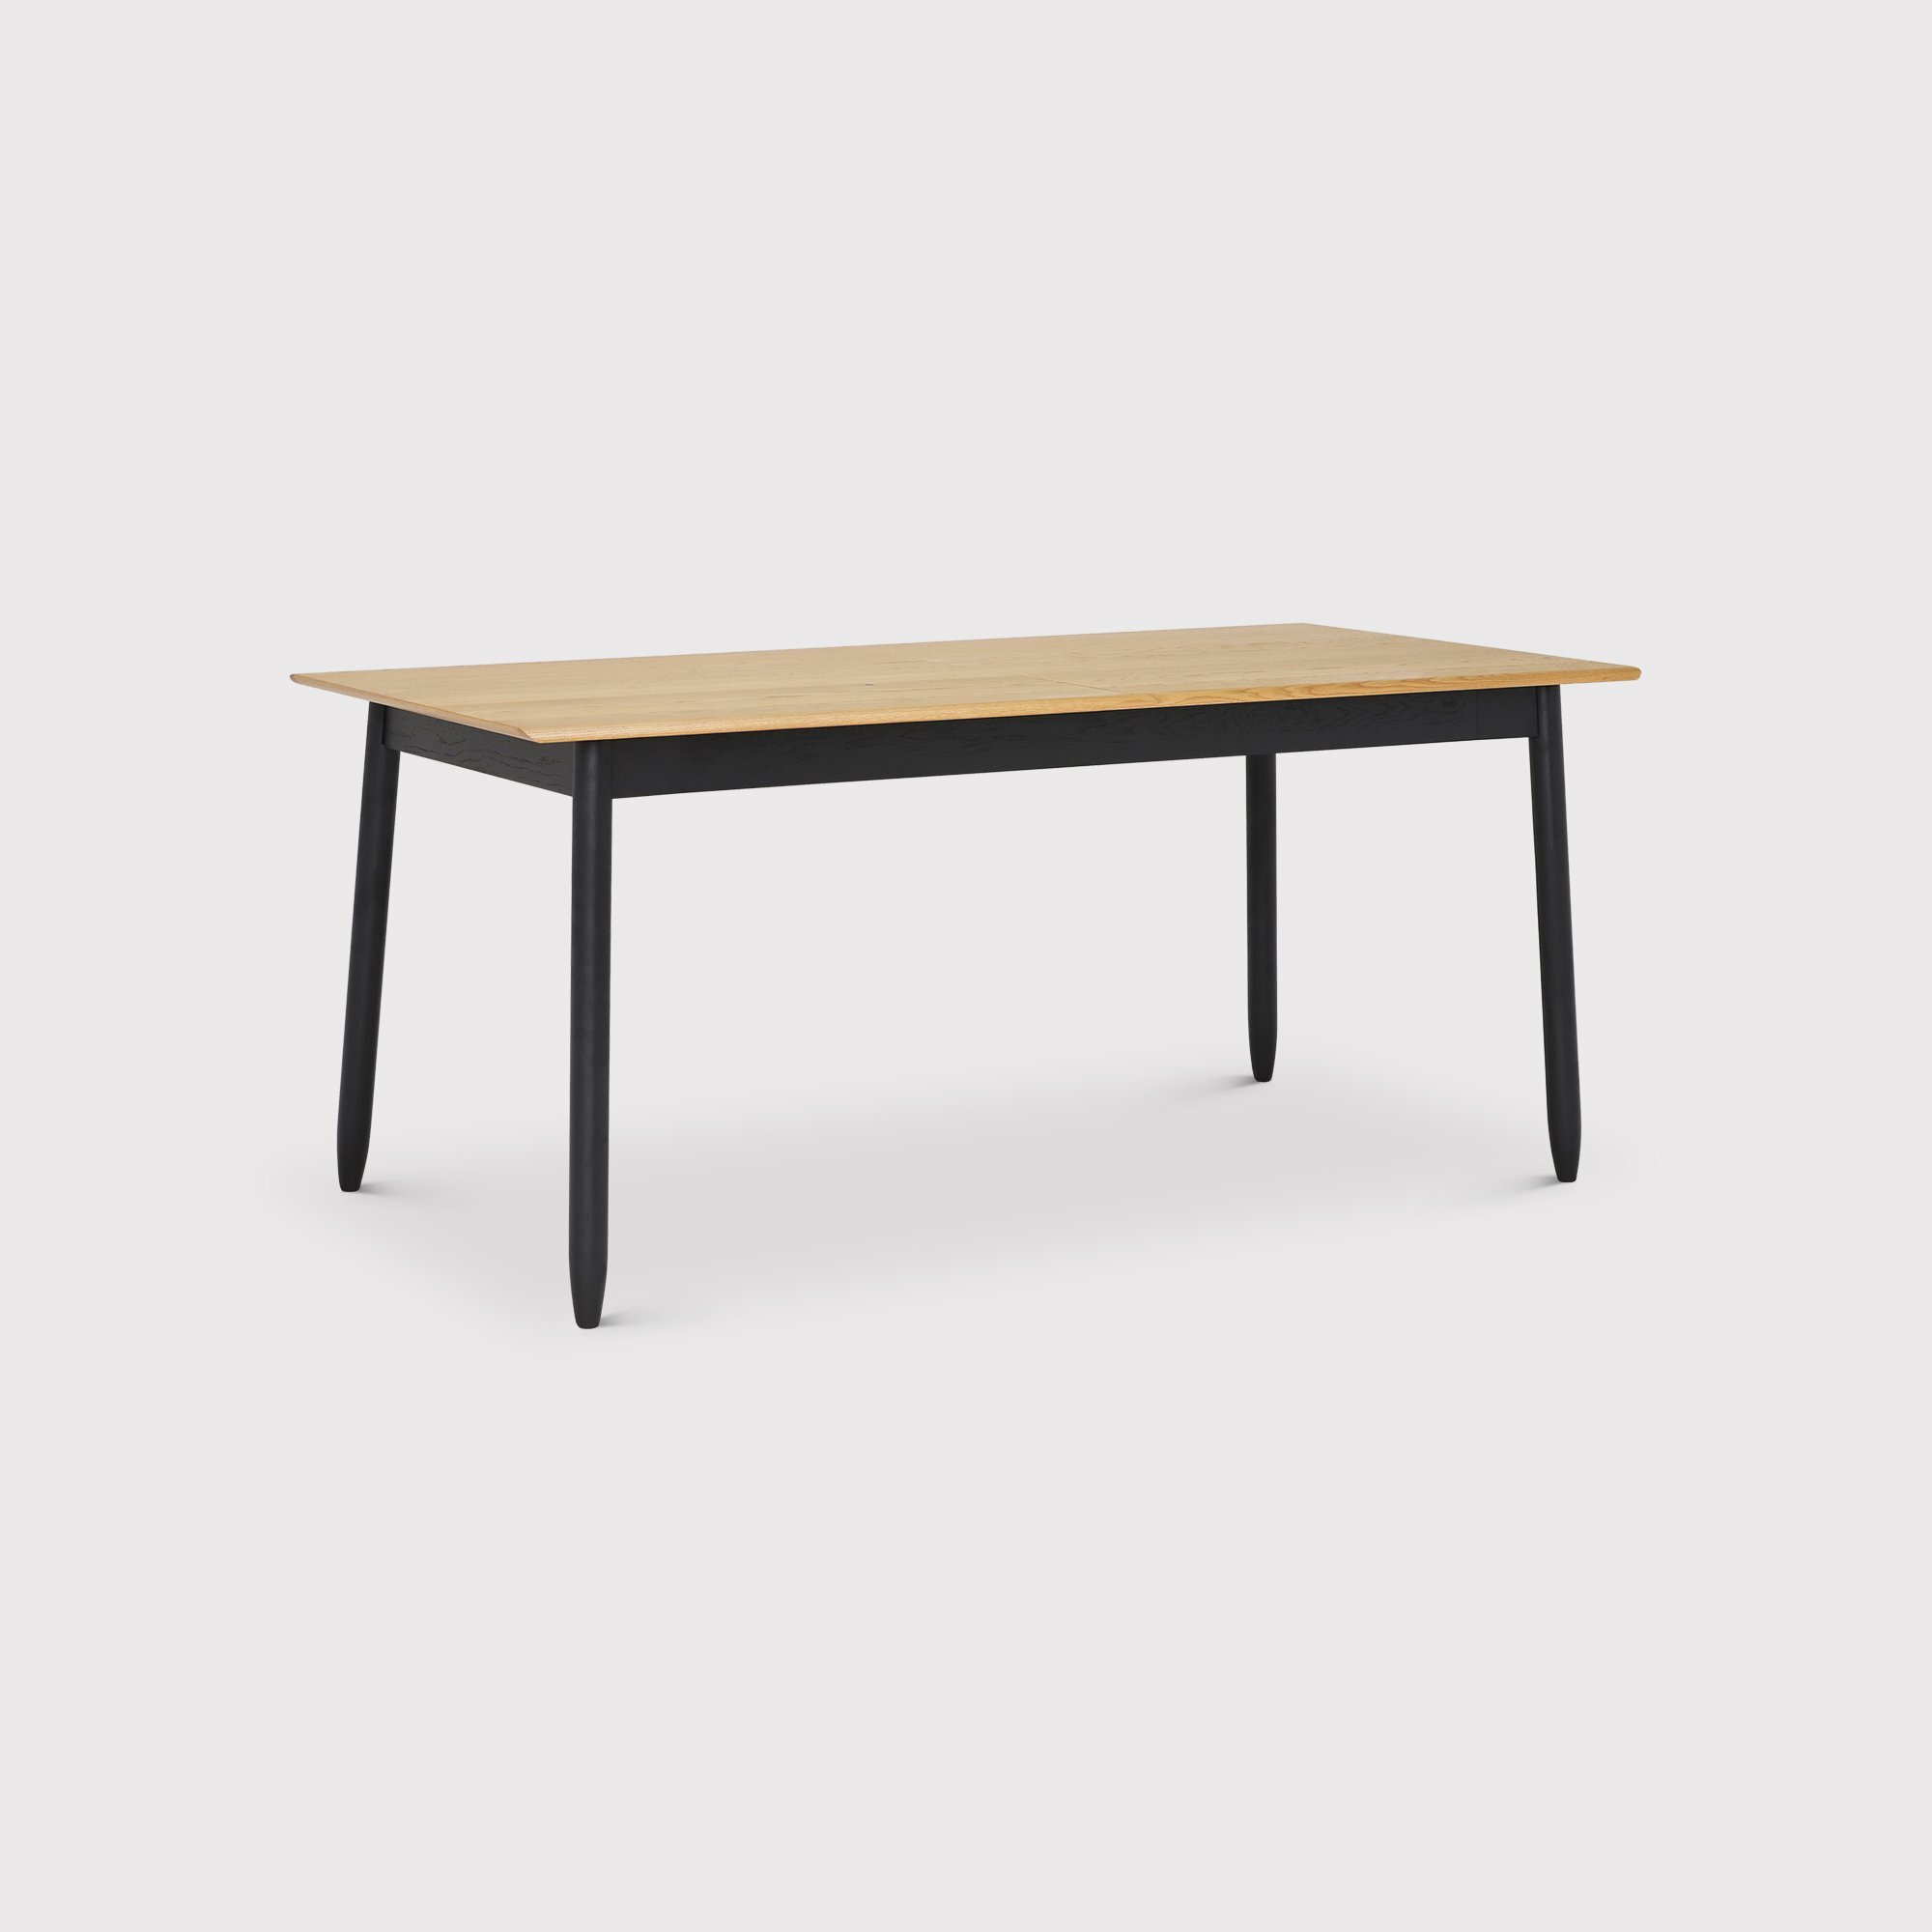 Ercol Monza Medium Extending Dining Table, Brown - Barker & Stonehouse - image 1